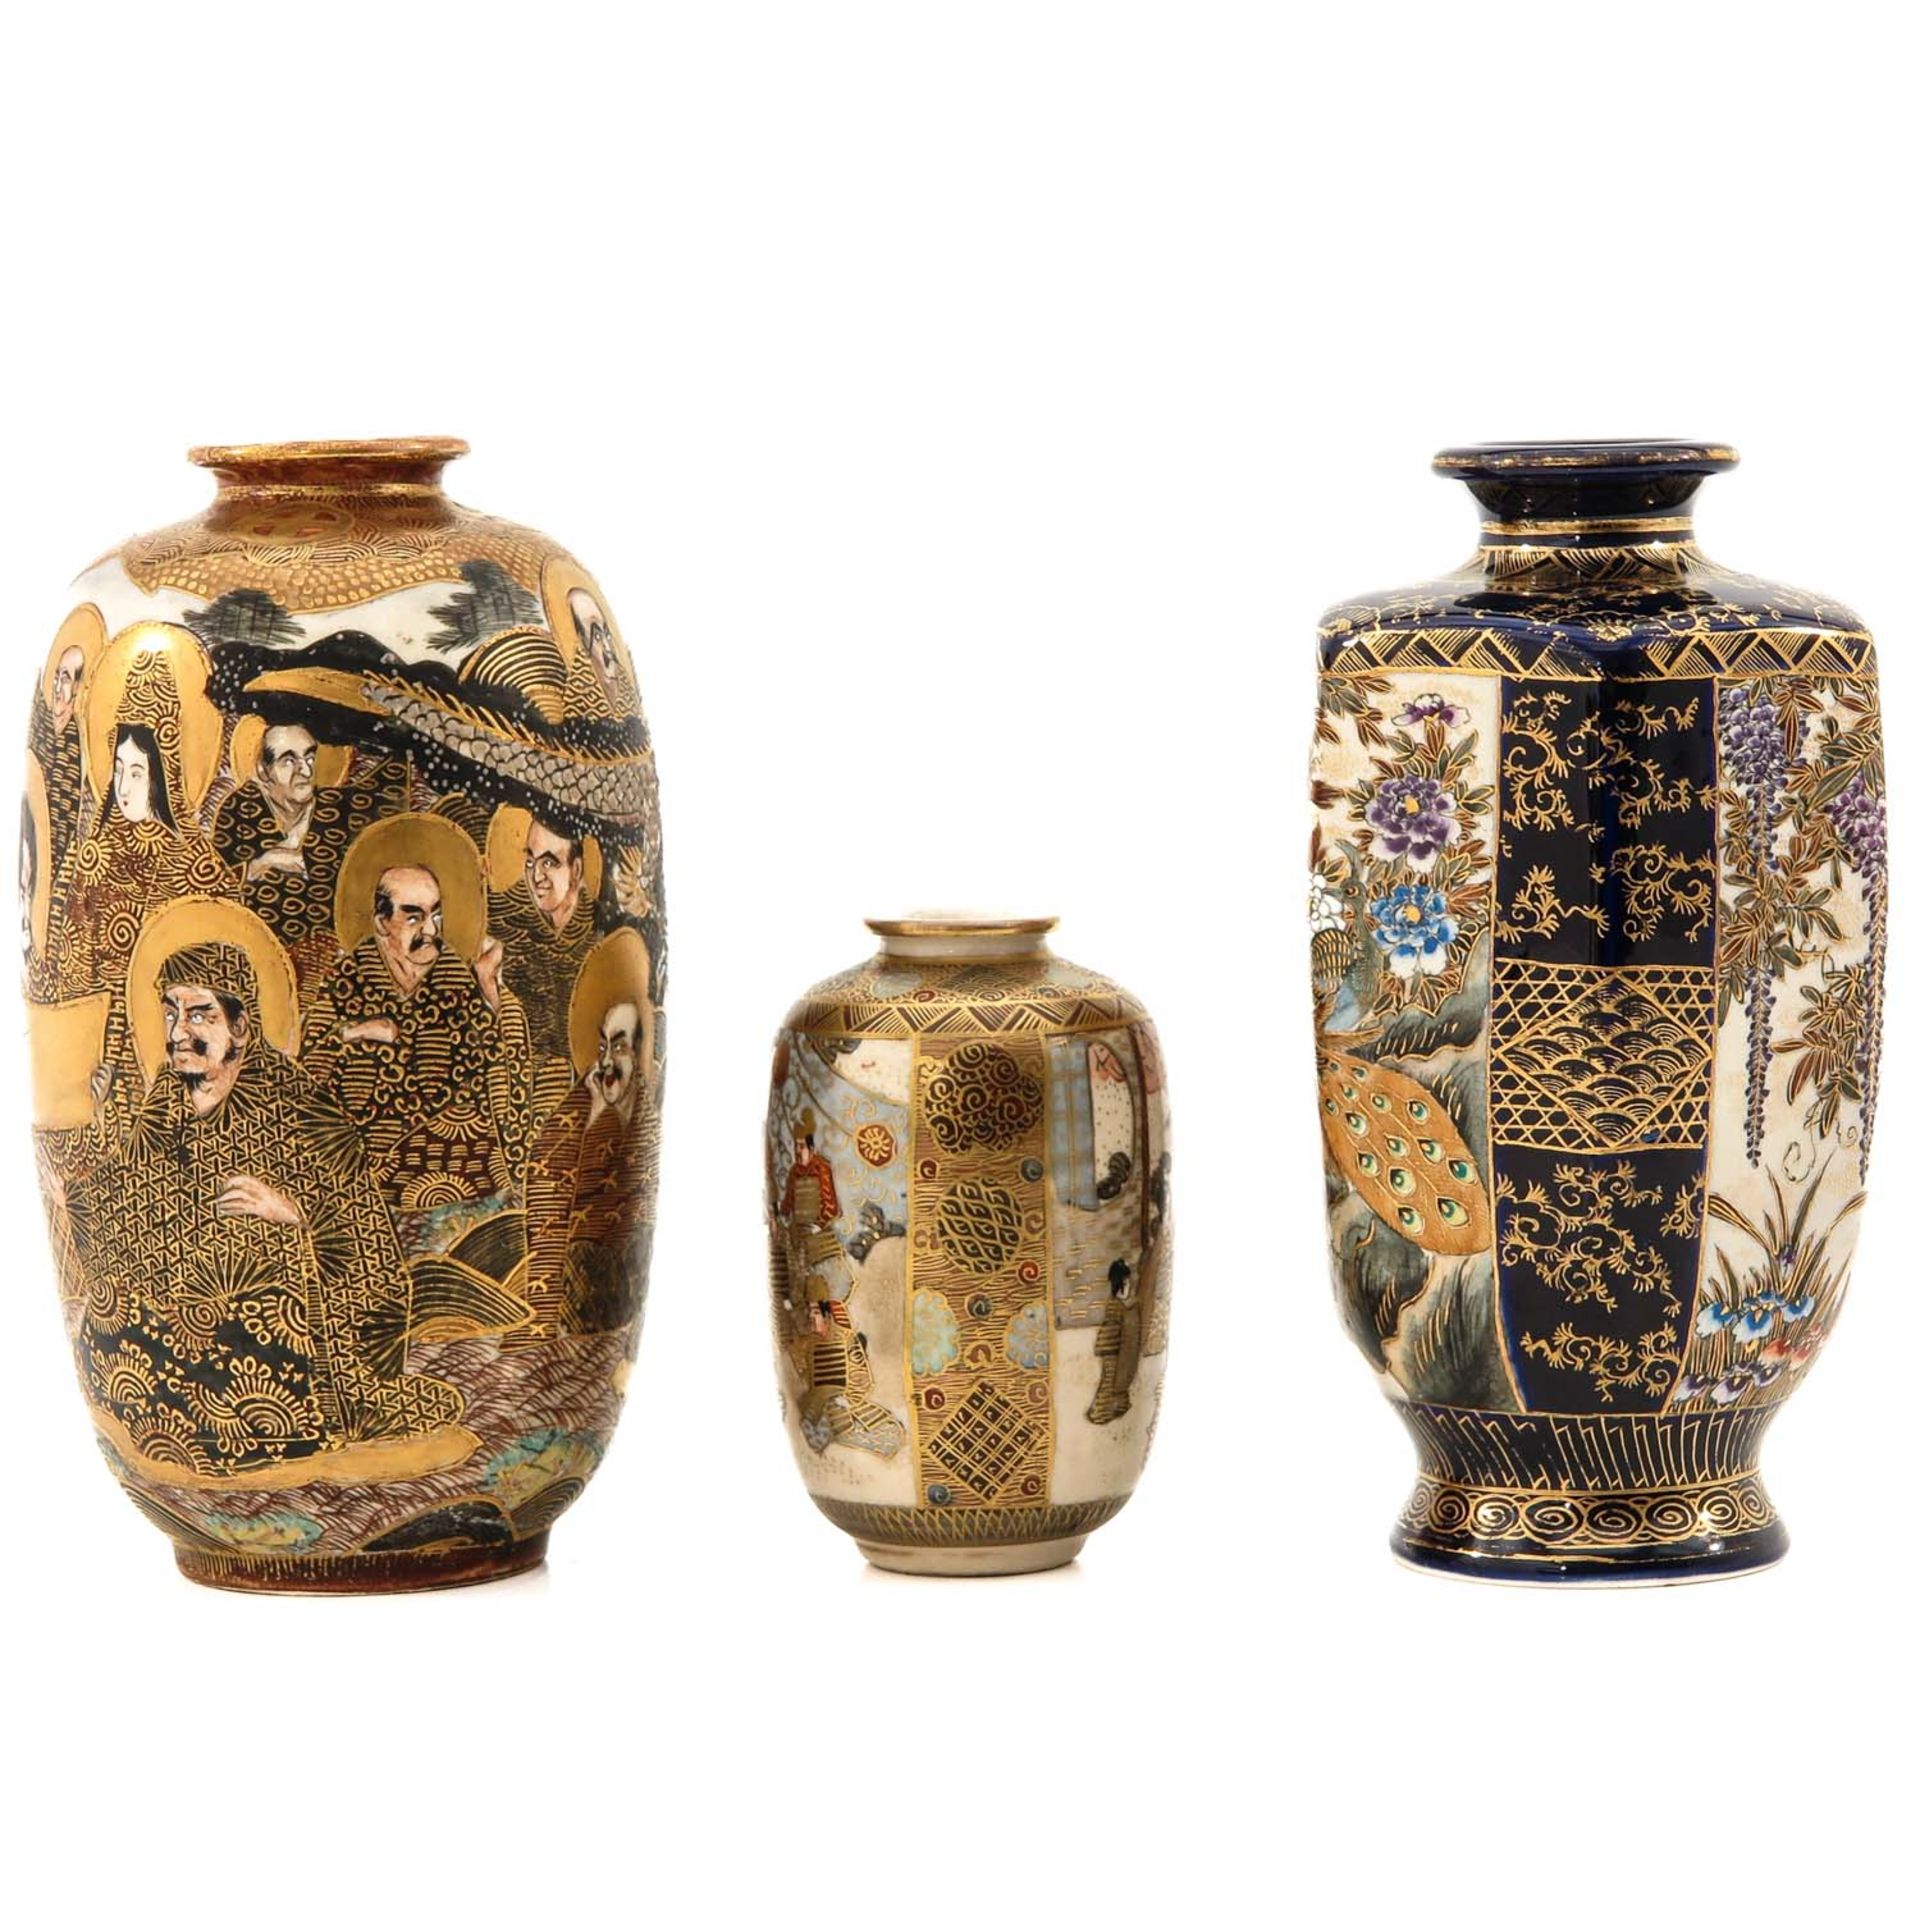 A Collection of 3 Satsuma Vases - Image 2 of 10